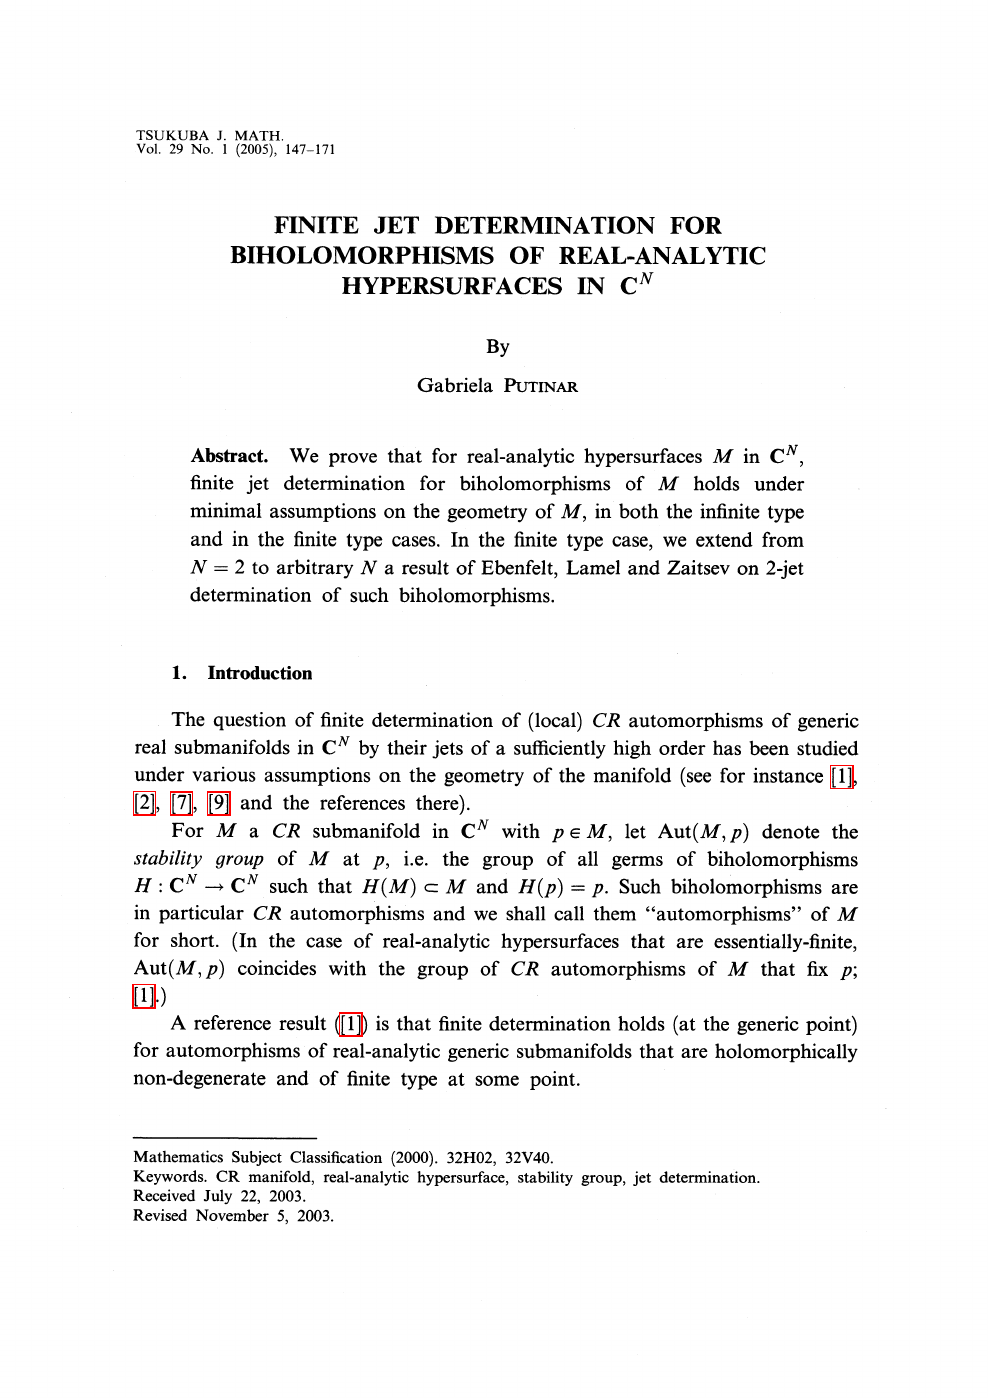 Finite Jet Determination For Biholomorphisms Of Real Analytic Hypersurfaces In C N Topic Of Research Paper In Mathematics Download Scholarly Article Pdf And Read For Free On Cyberleninka Open Science Hub